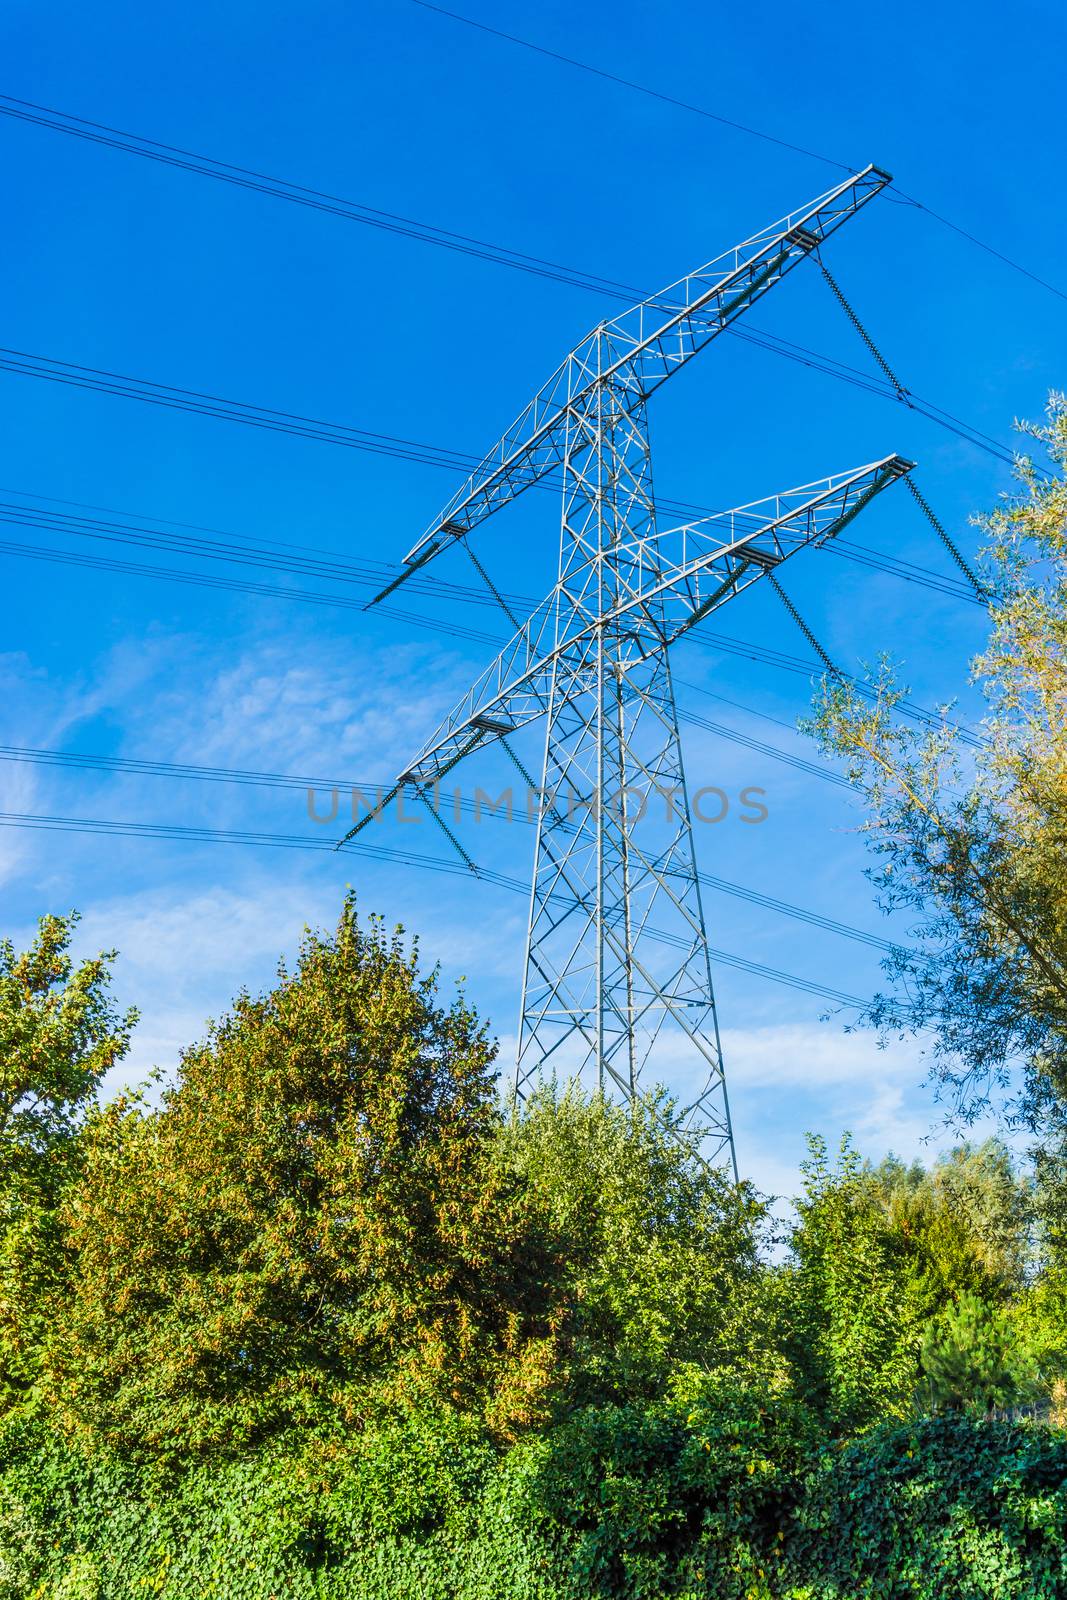 steel electricity power tower construction in a nature landscape with blue sky